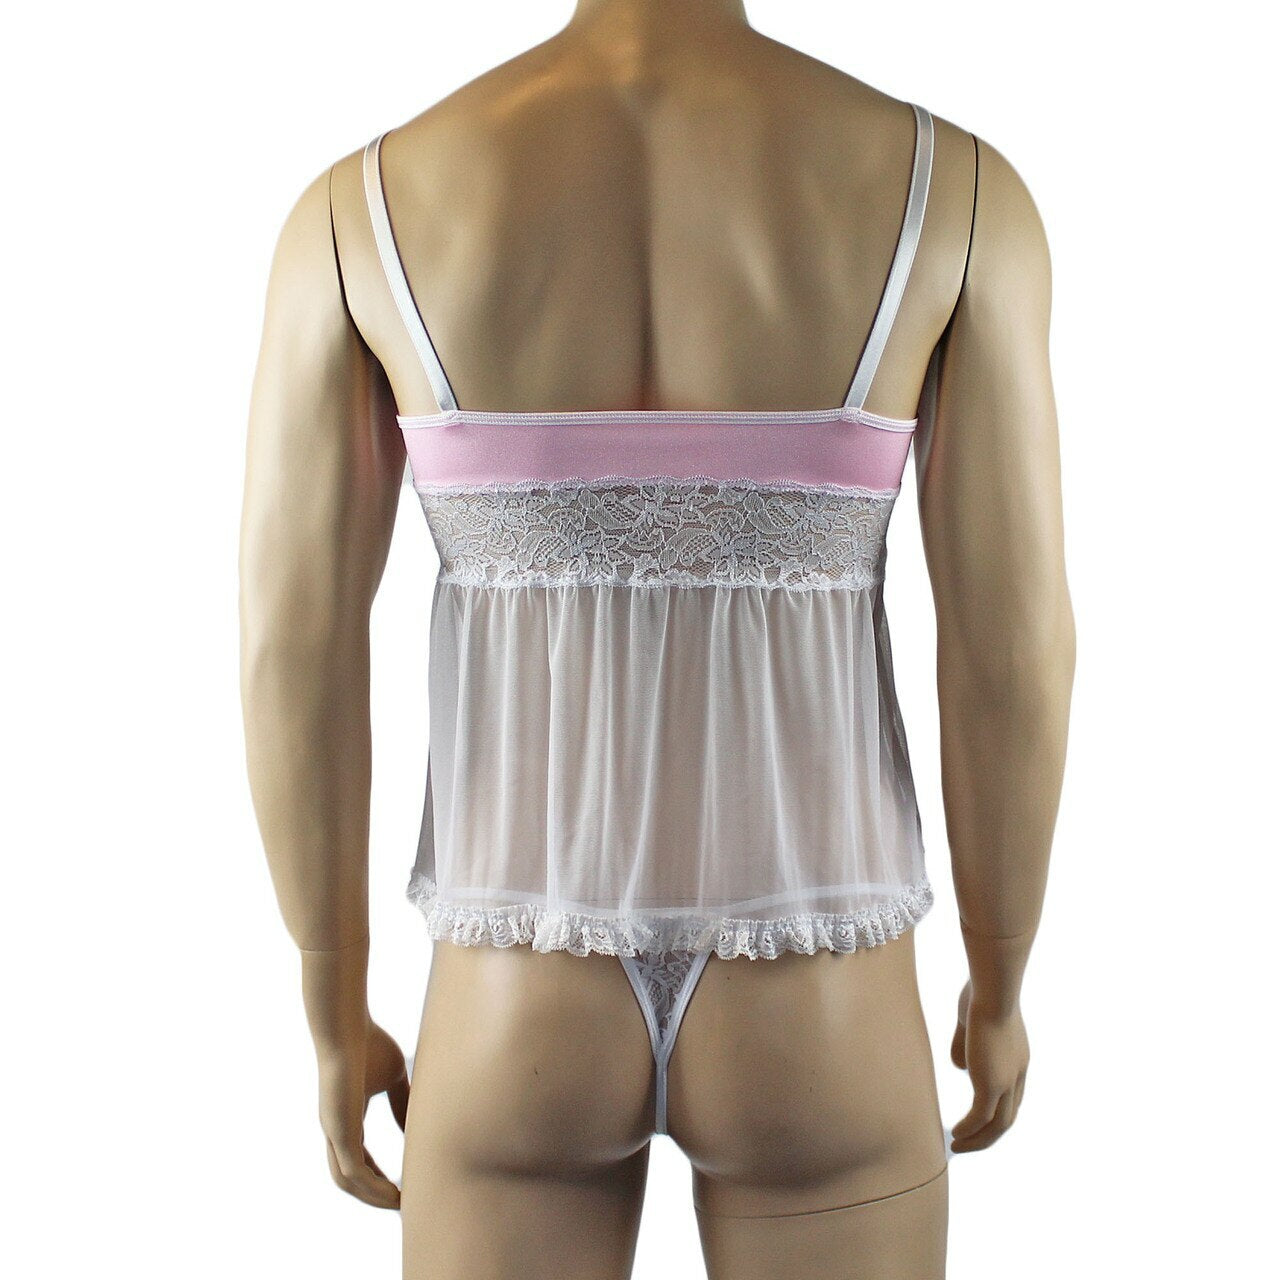 Mens Joanne Mini Babydoll Camisole & G string - Sizes up to 3XL Light Pink & White